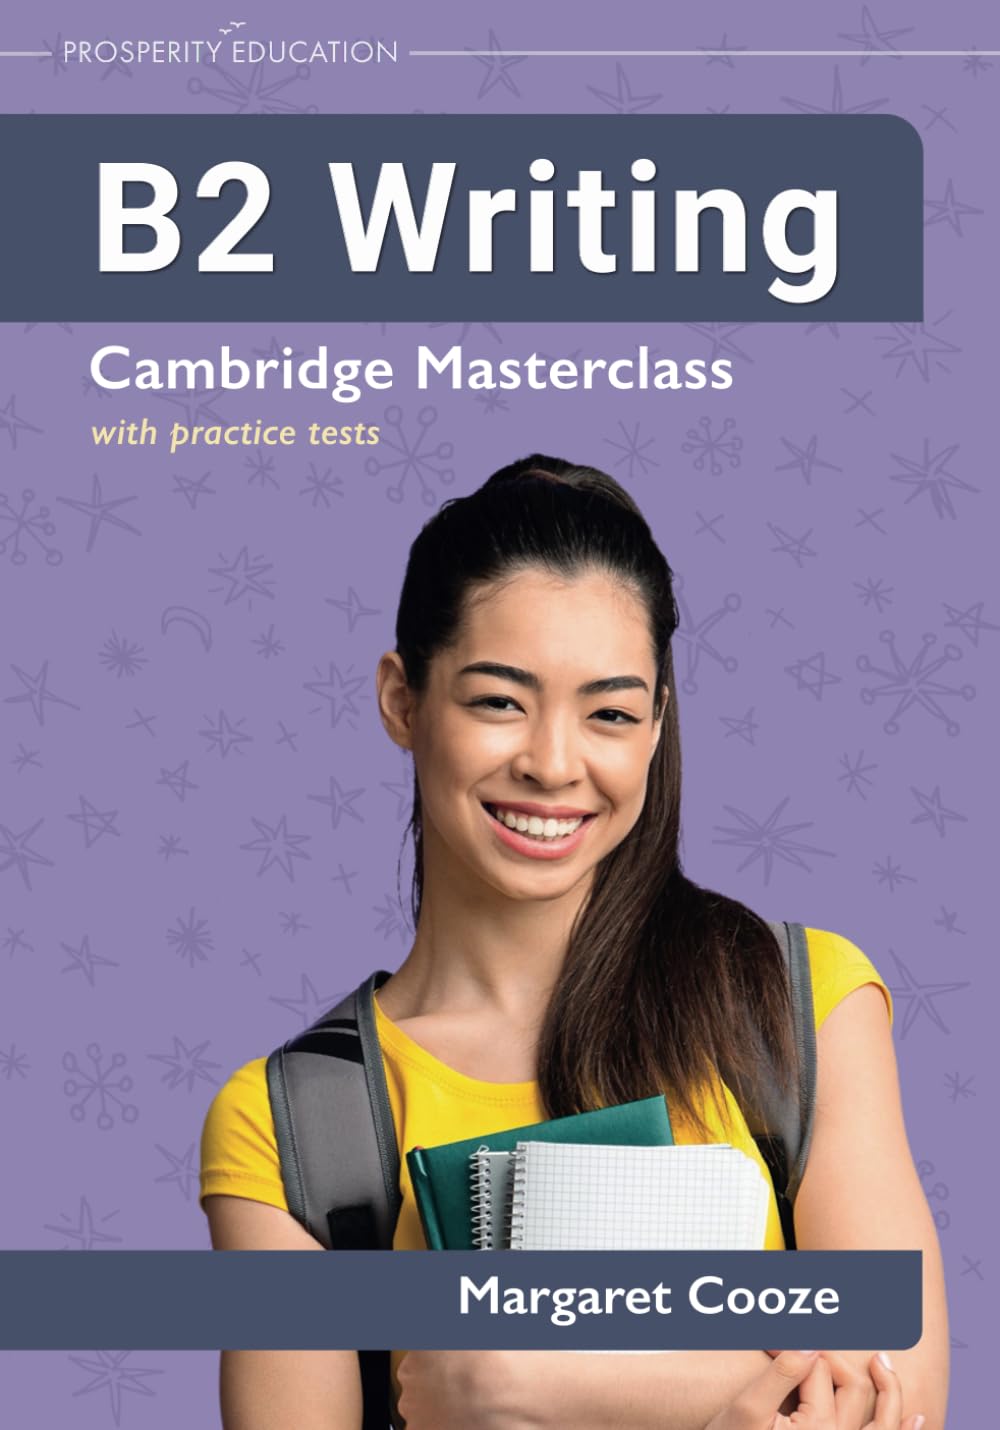 B2 Writing Cambridge Masterclass With Practice Tests | Margaret Cooze